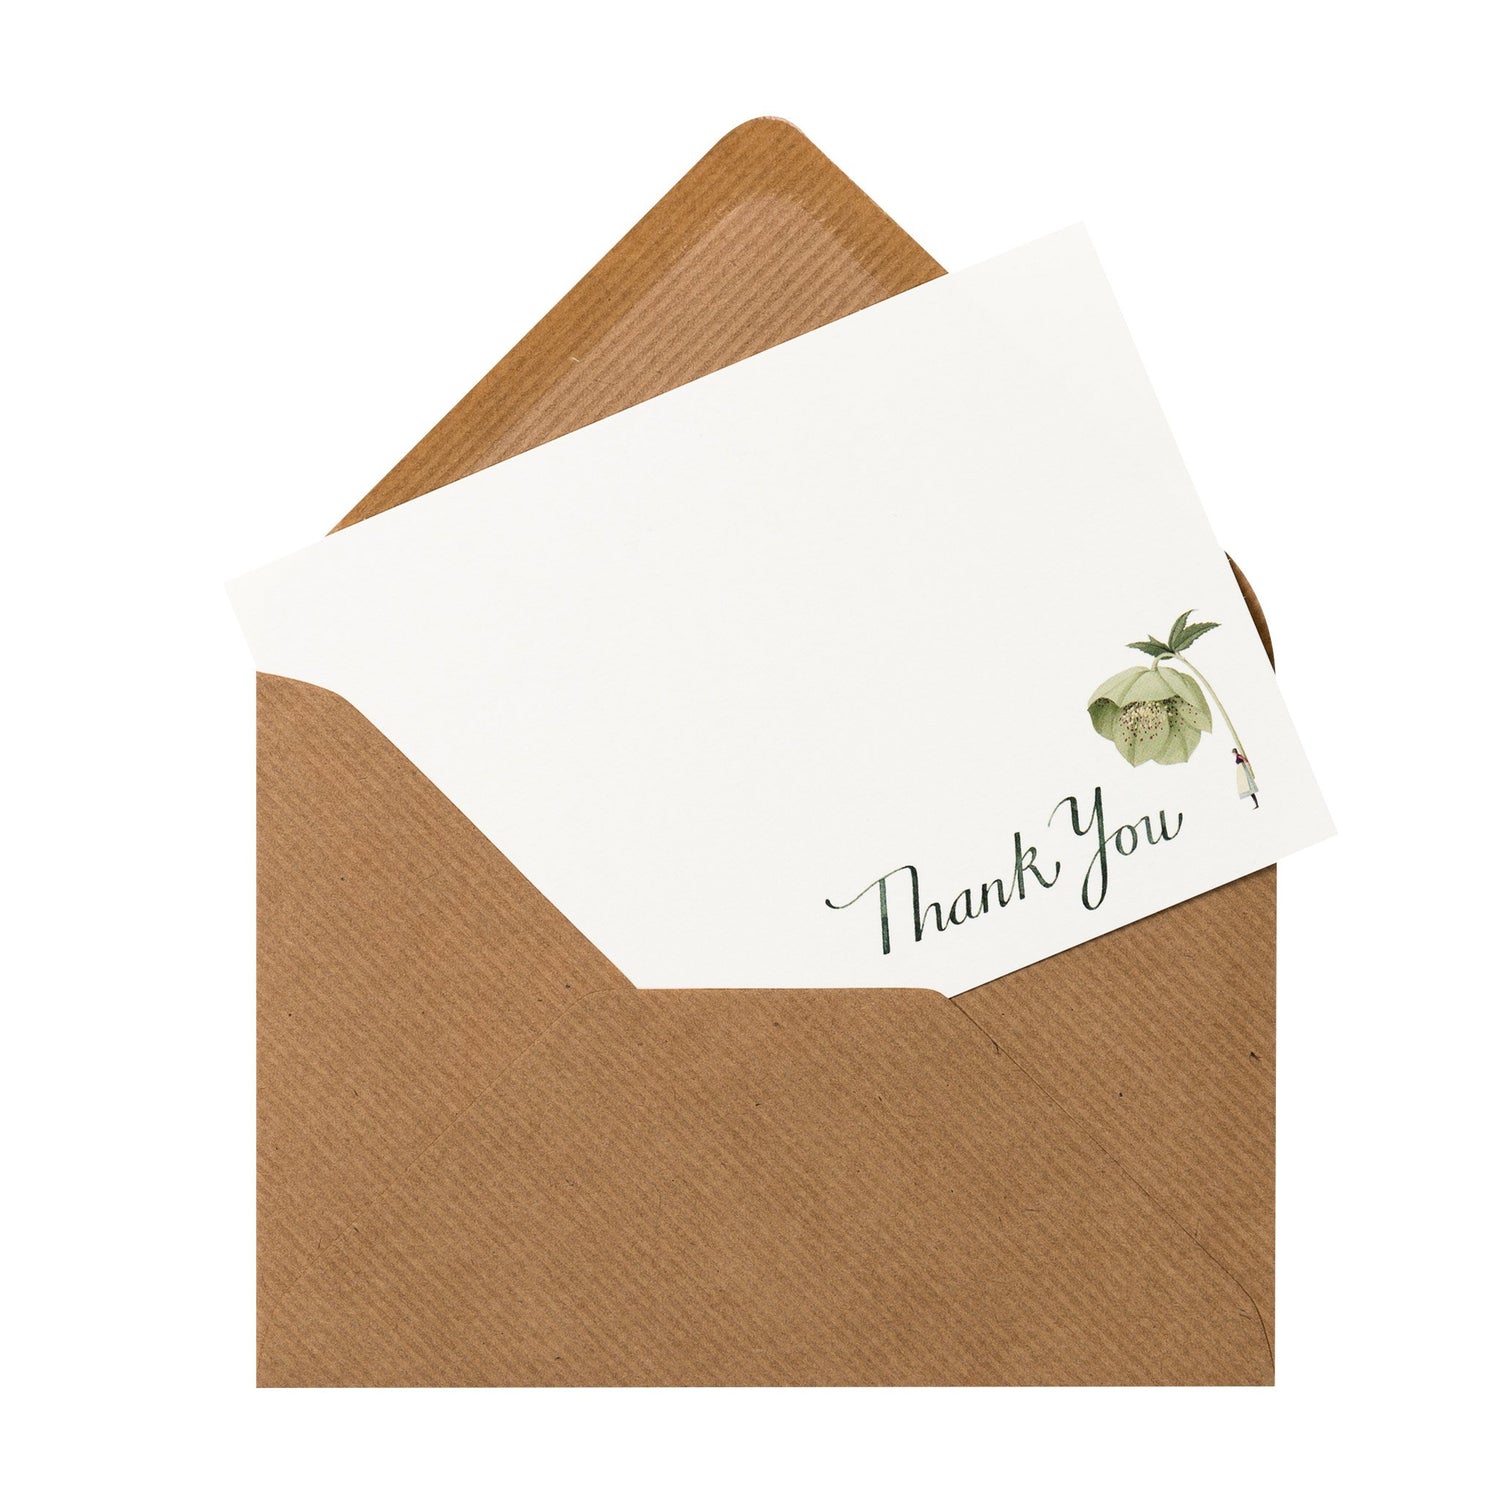 fsc paper, flatnotes, thank you notes, green flowers, hellebore, illustration, flowers, compostable, made in england